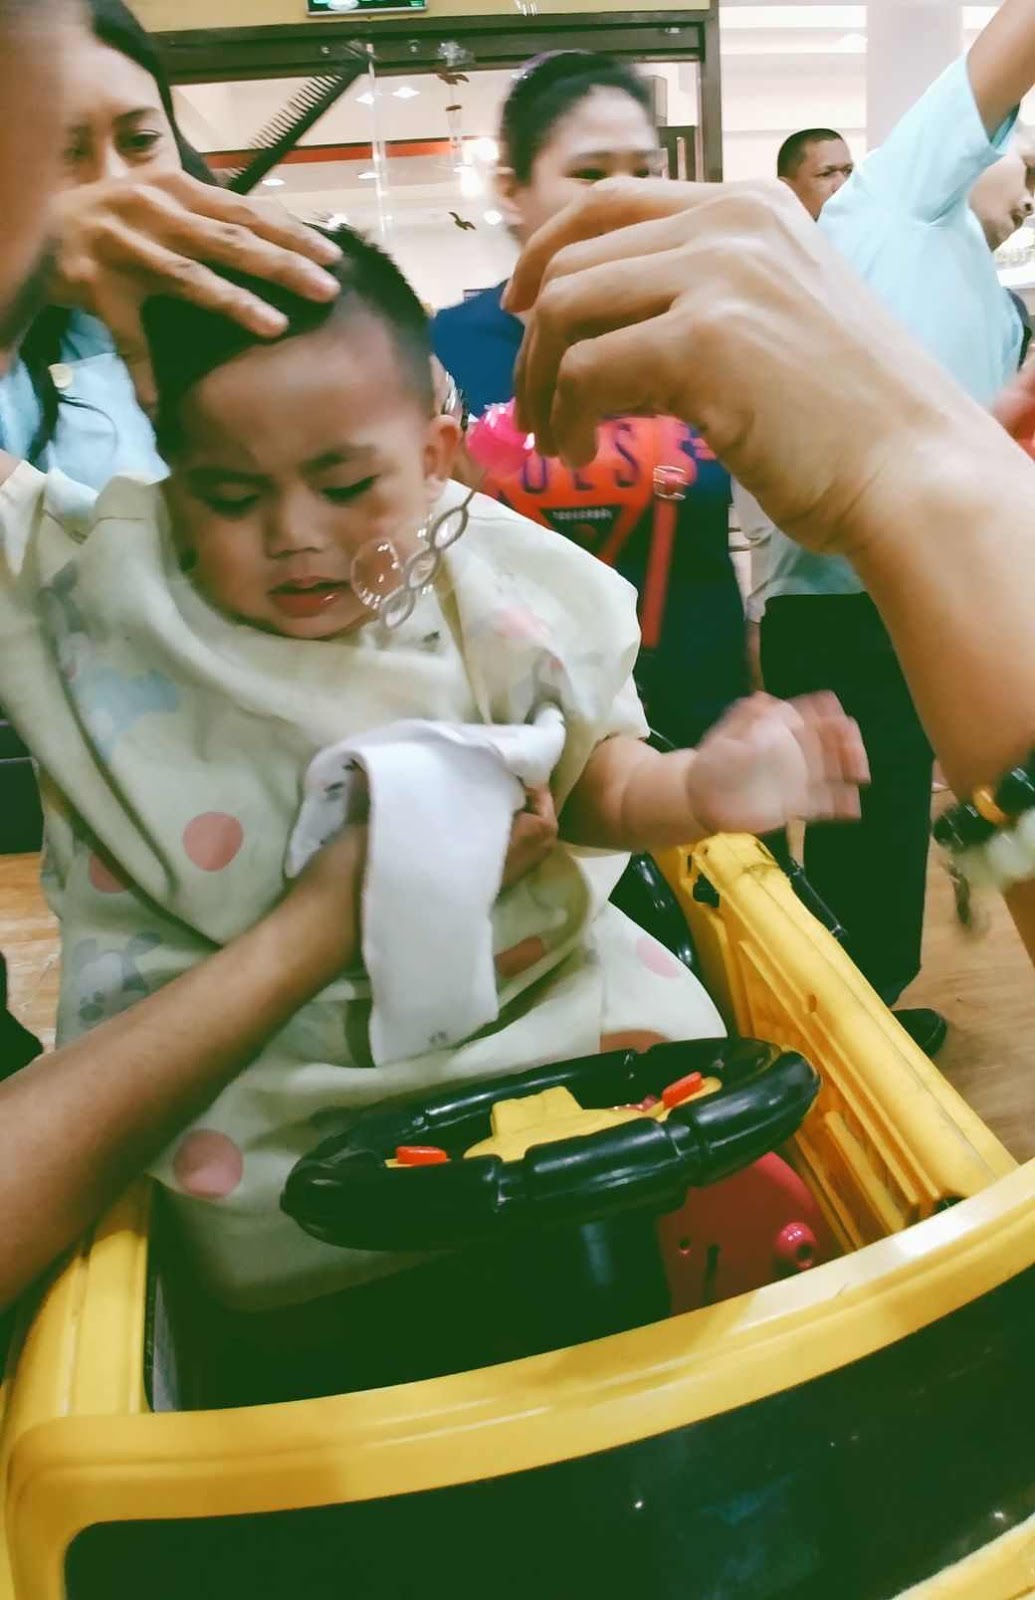 Miguel a bit agitated during his first haircut at Cuts 4 Tots